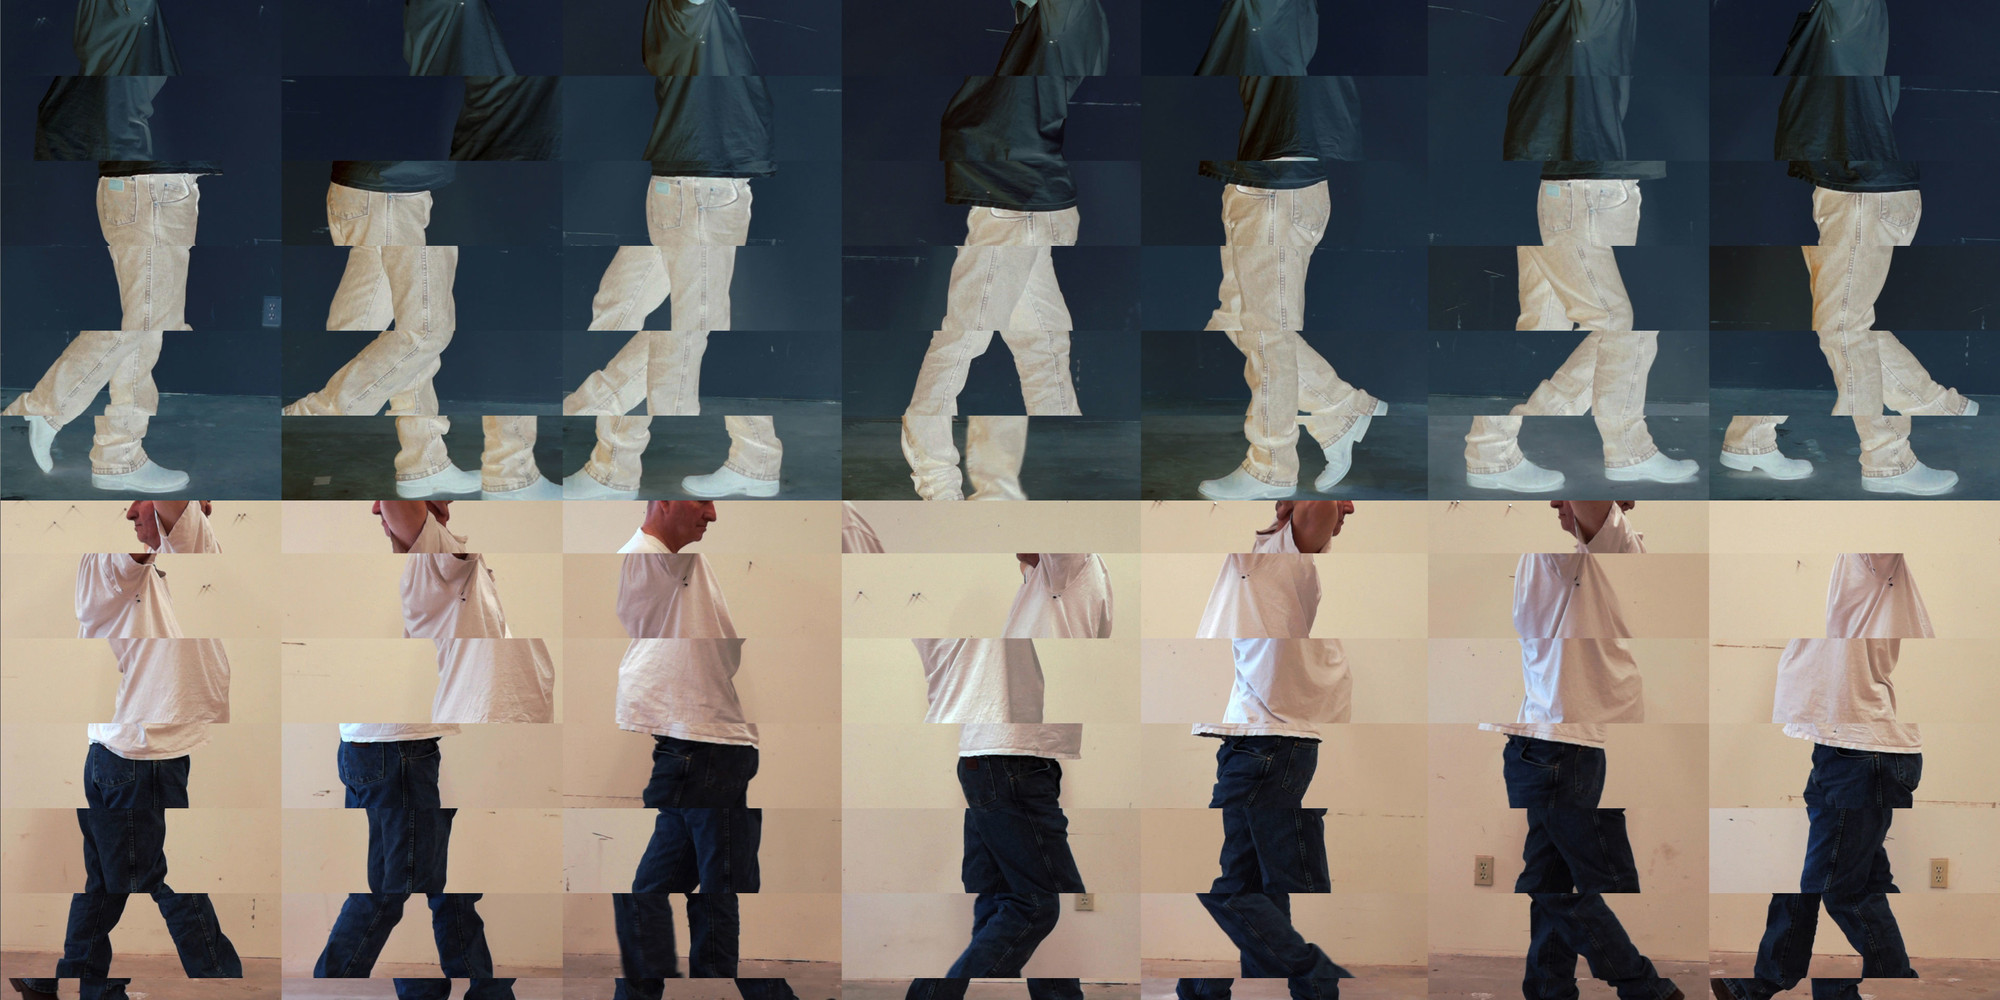 Bruce Nauman. Still from Contrapposto Studies, i through vii (detail). 2015/16. Seven-channel video. Jointly owned by The Museum of Modern Art, New York, acquired in part through the generosity of Agnes Gund and Jo Carole and Ronald S. Lauder; and Emanuel Hoffmann Foundation, gift of the president 2017, on permanent loan to Öffentliche Kunstsammlung Basel. © 2018 Bruce Nauman/Artists Rights Society (ARS), New York